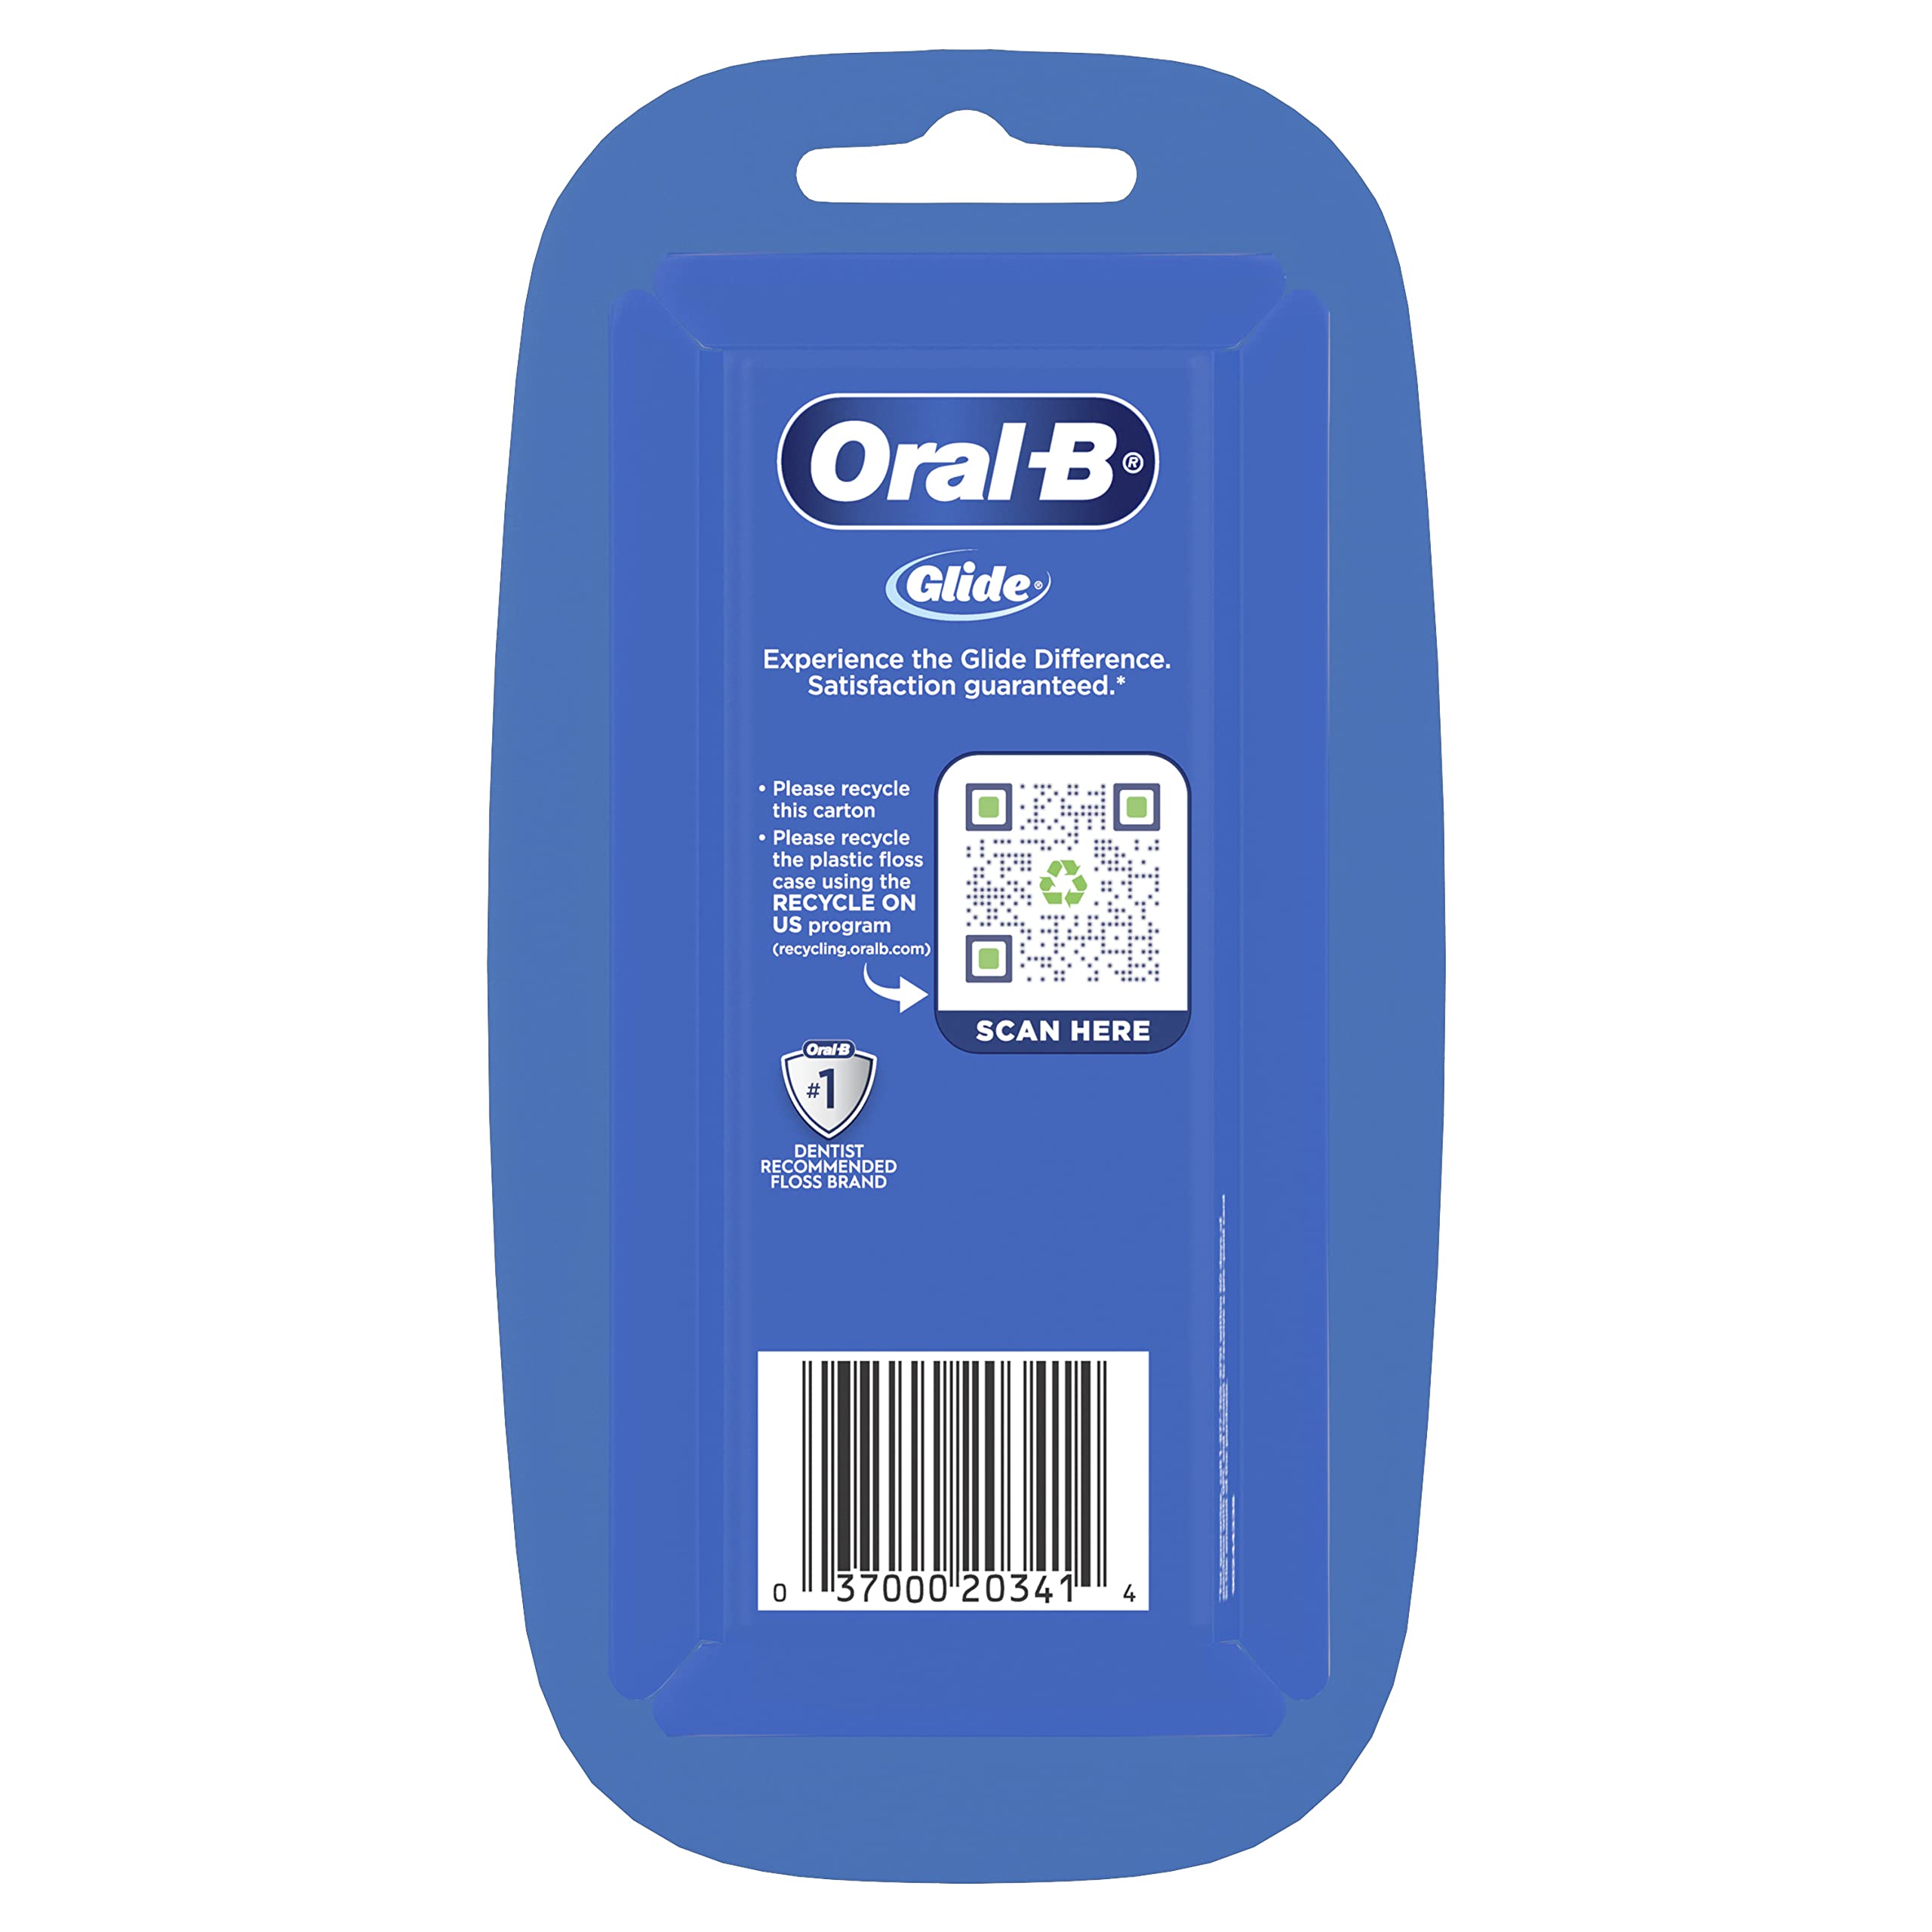 Oral-B Glide Pro-Health Comfort Plus Dental Floss, Extra Soft, Value 2 Pack (40m Each)